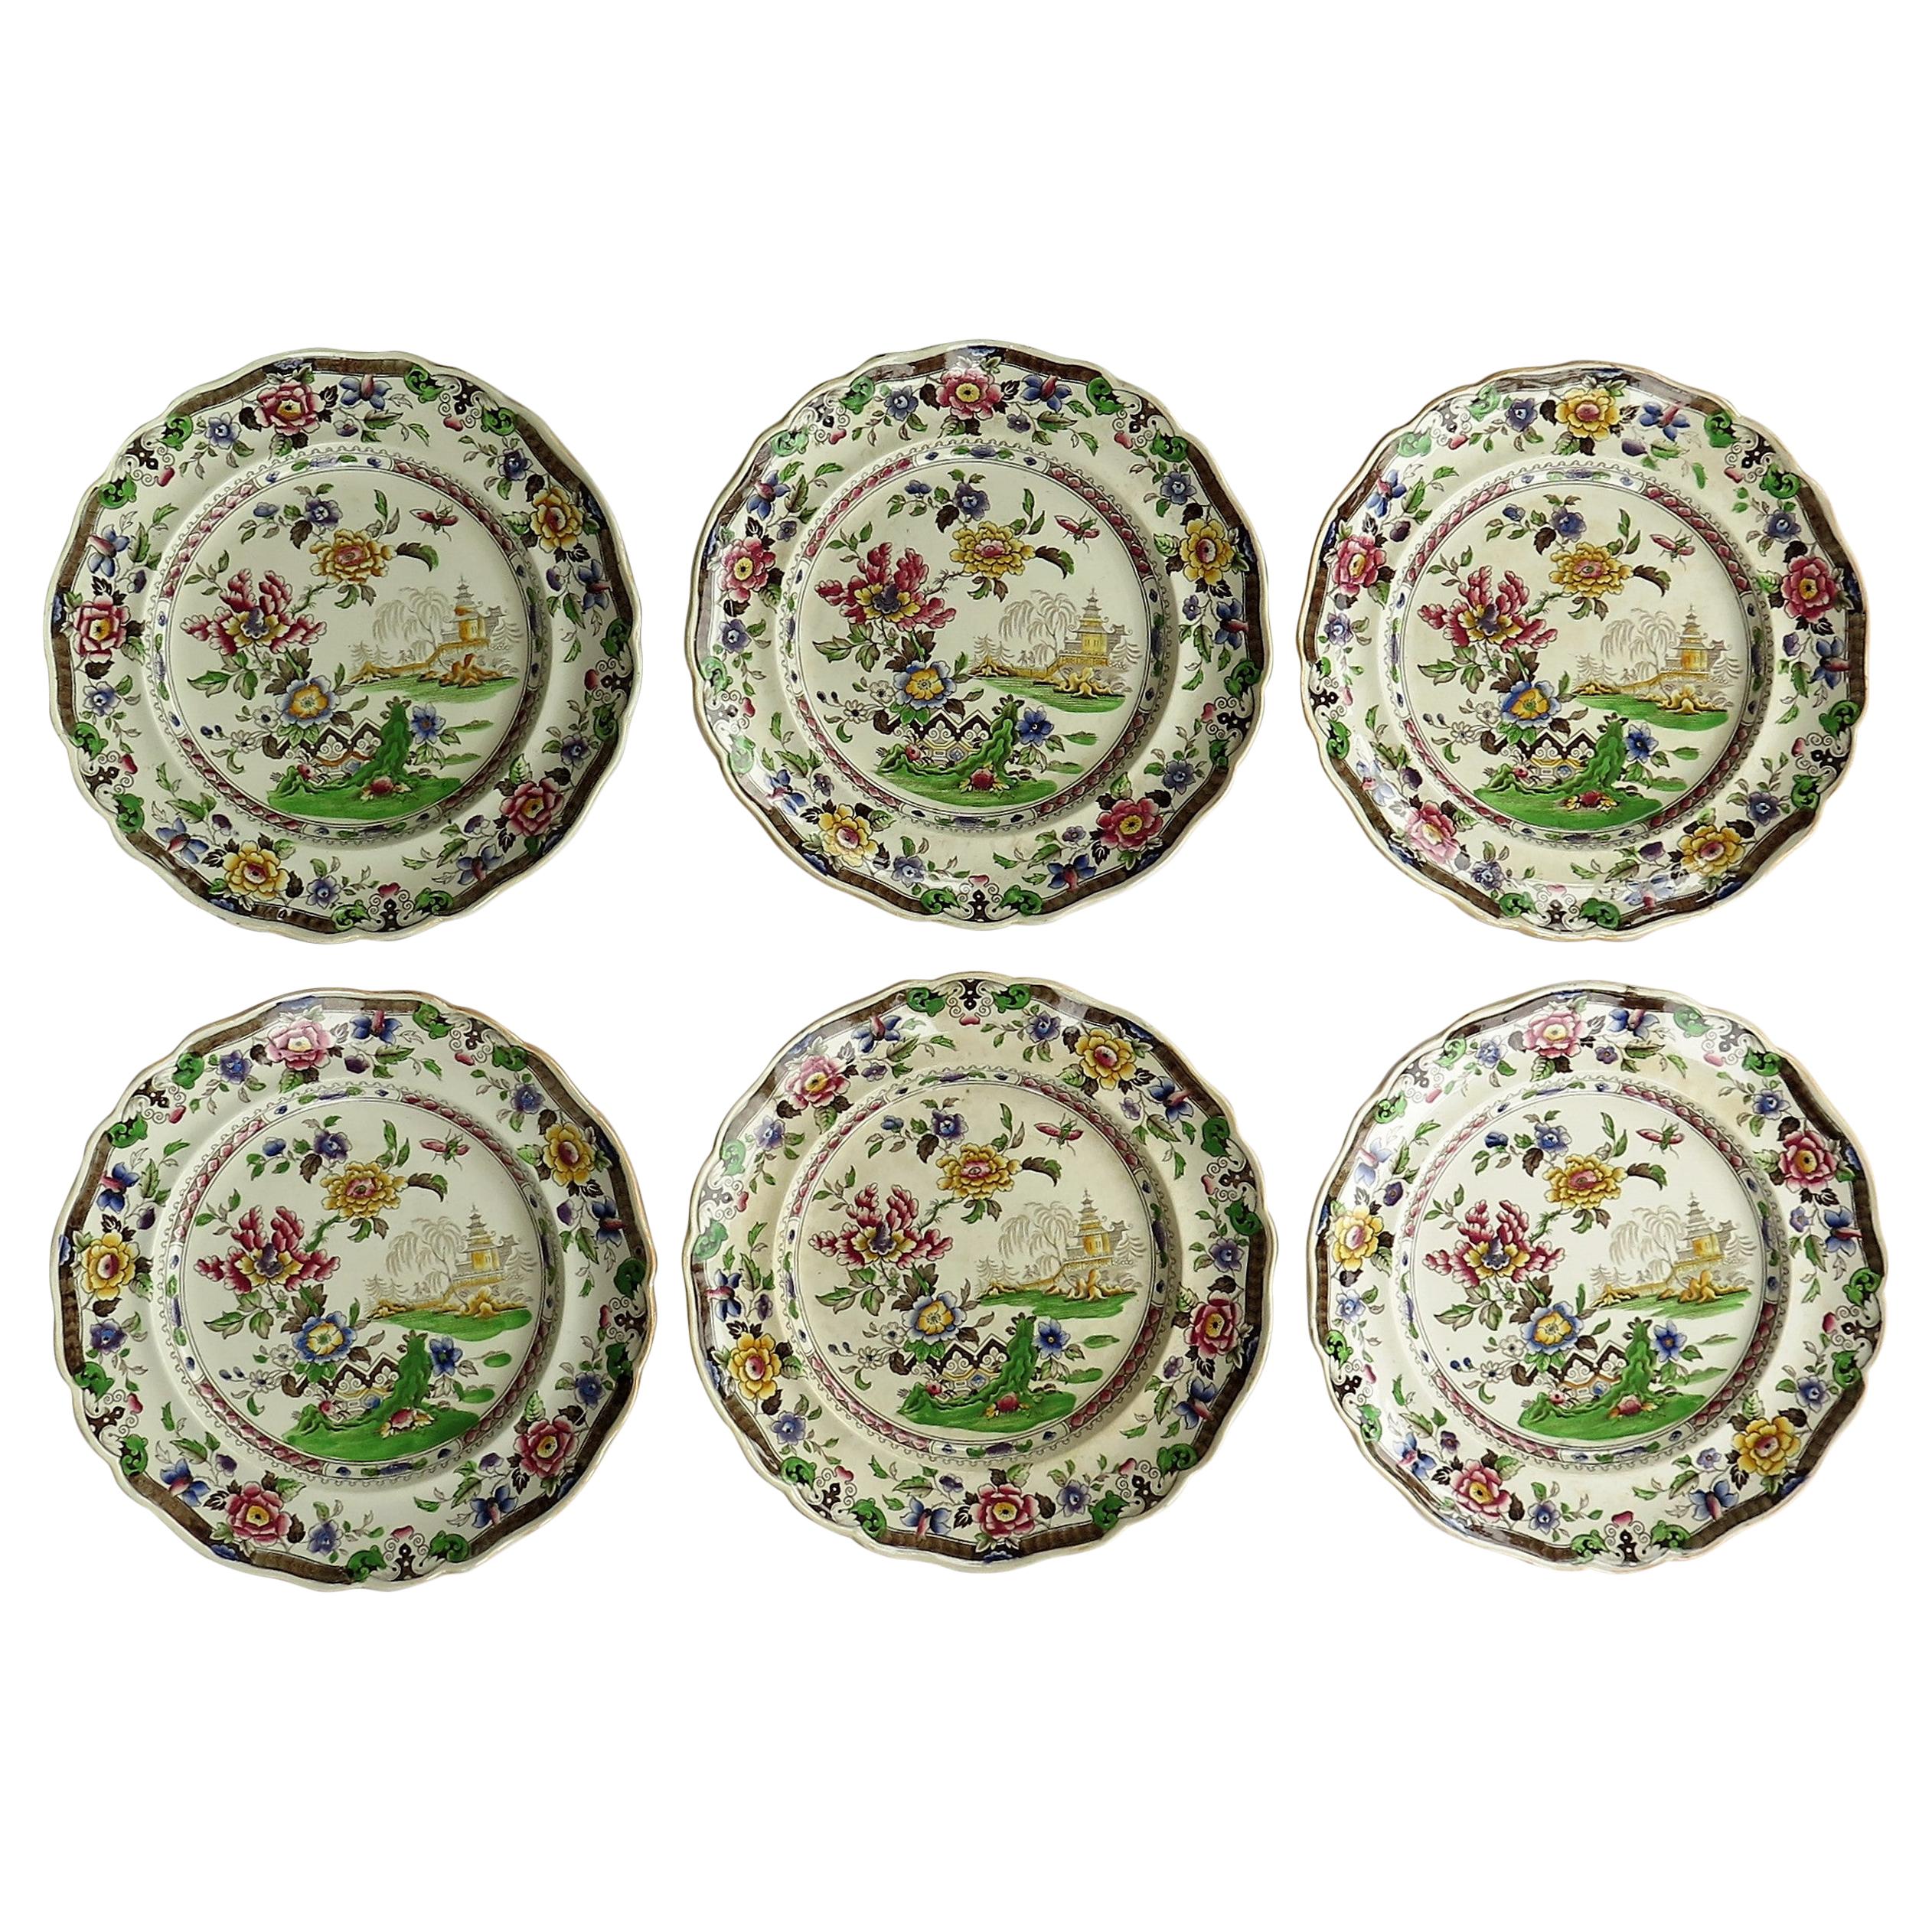 SIX Large Pottery Dinner Plates by Zachariah Boyle Chinese Flora Ptn, circa 1825